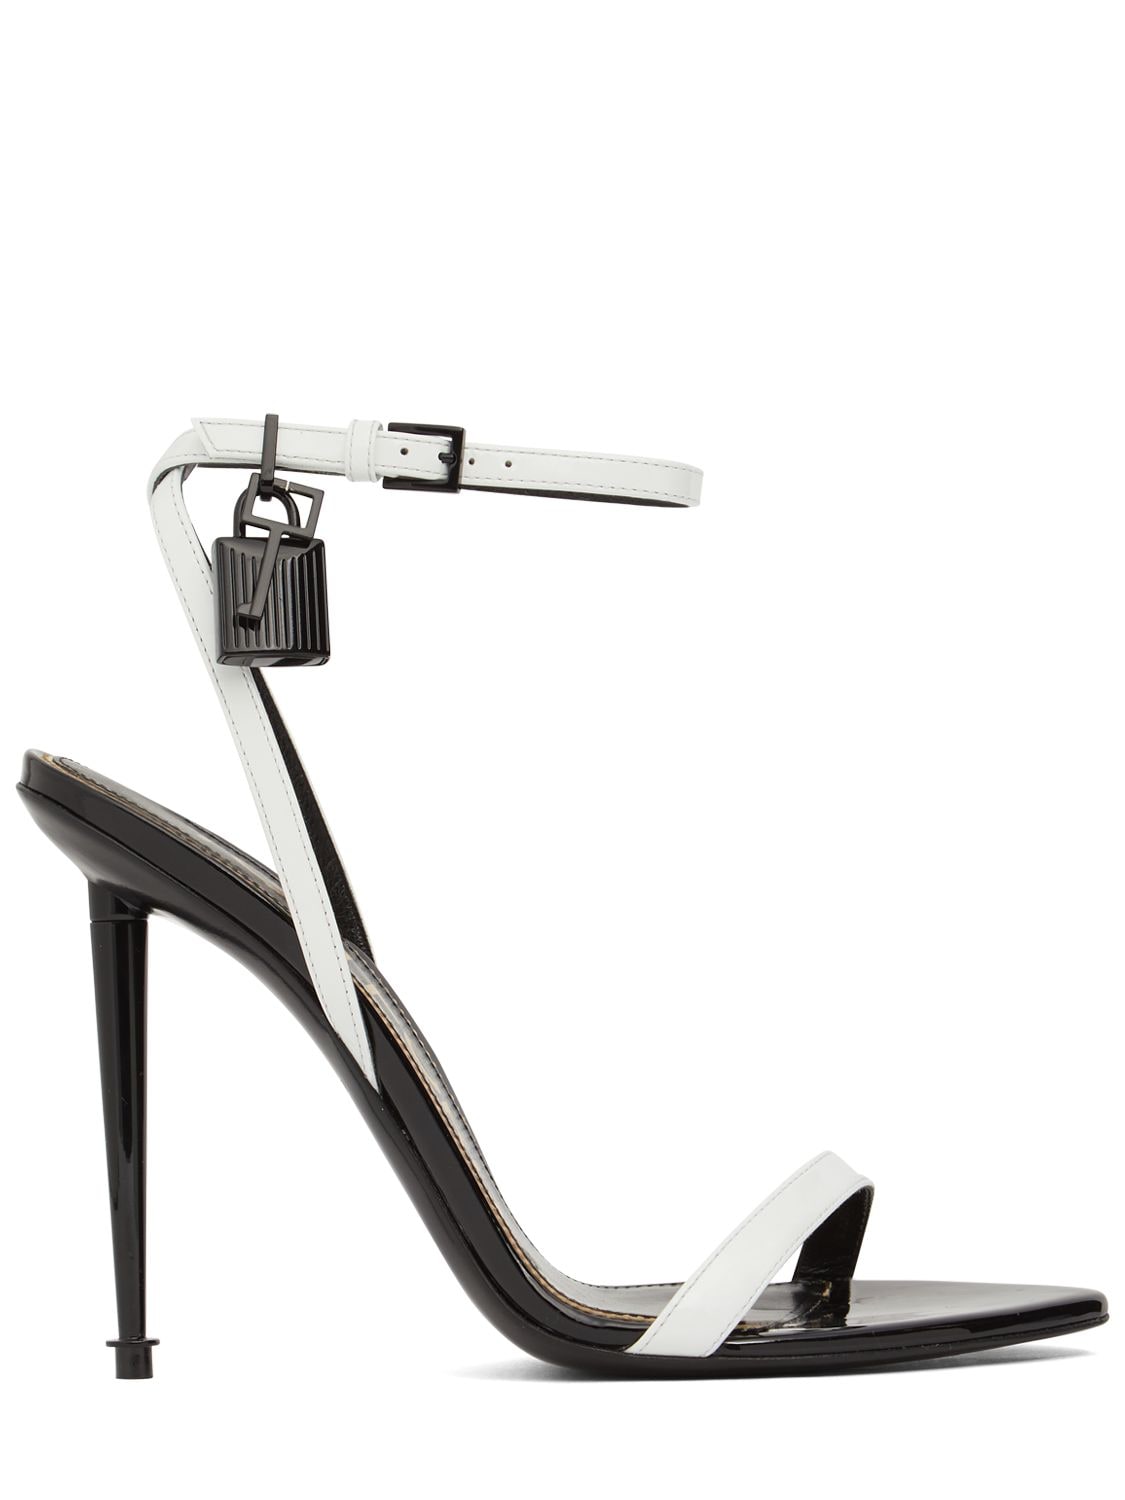 TOM FORD 105mm Padlock Patent Leather Sandals